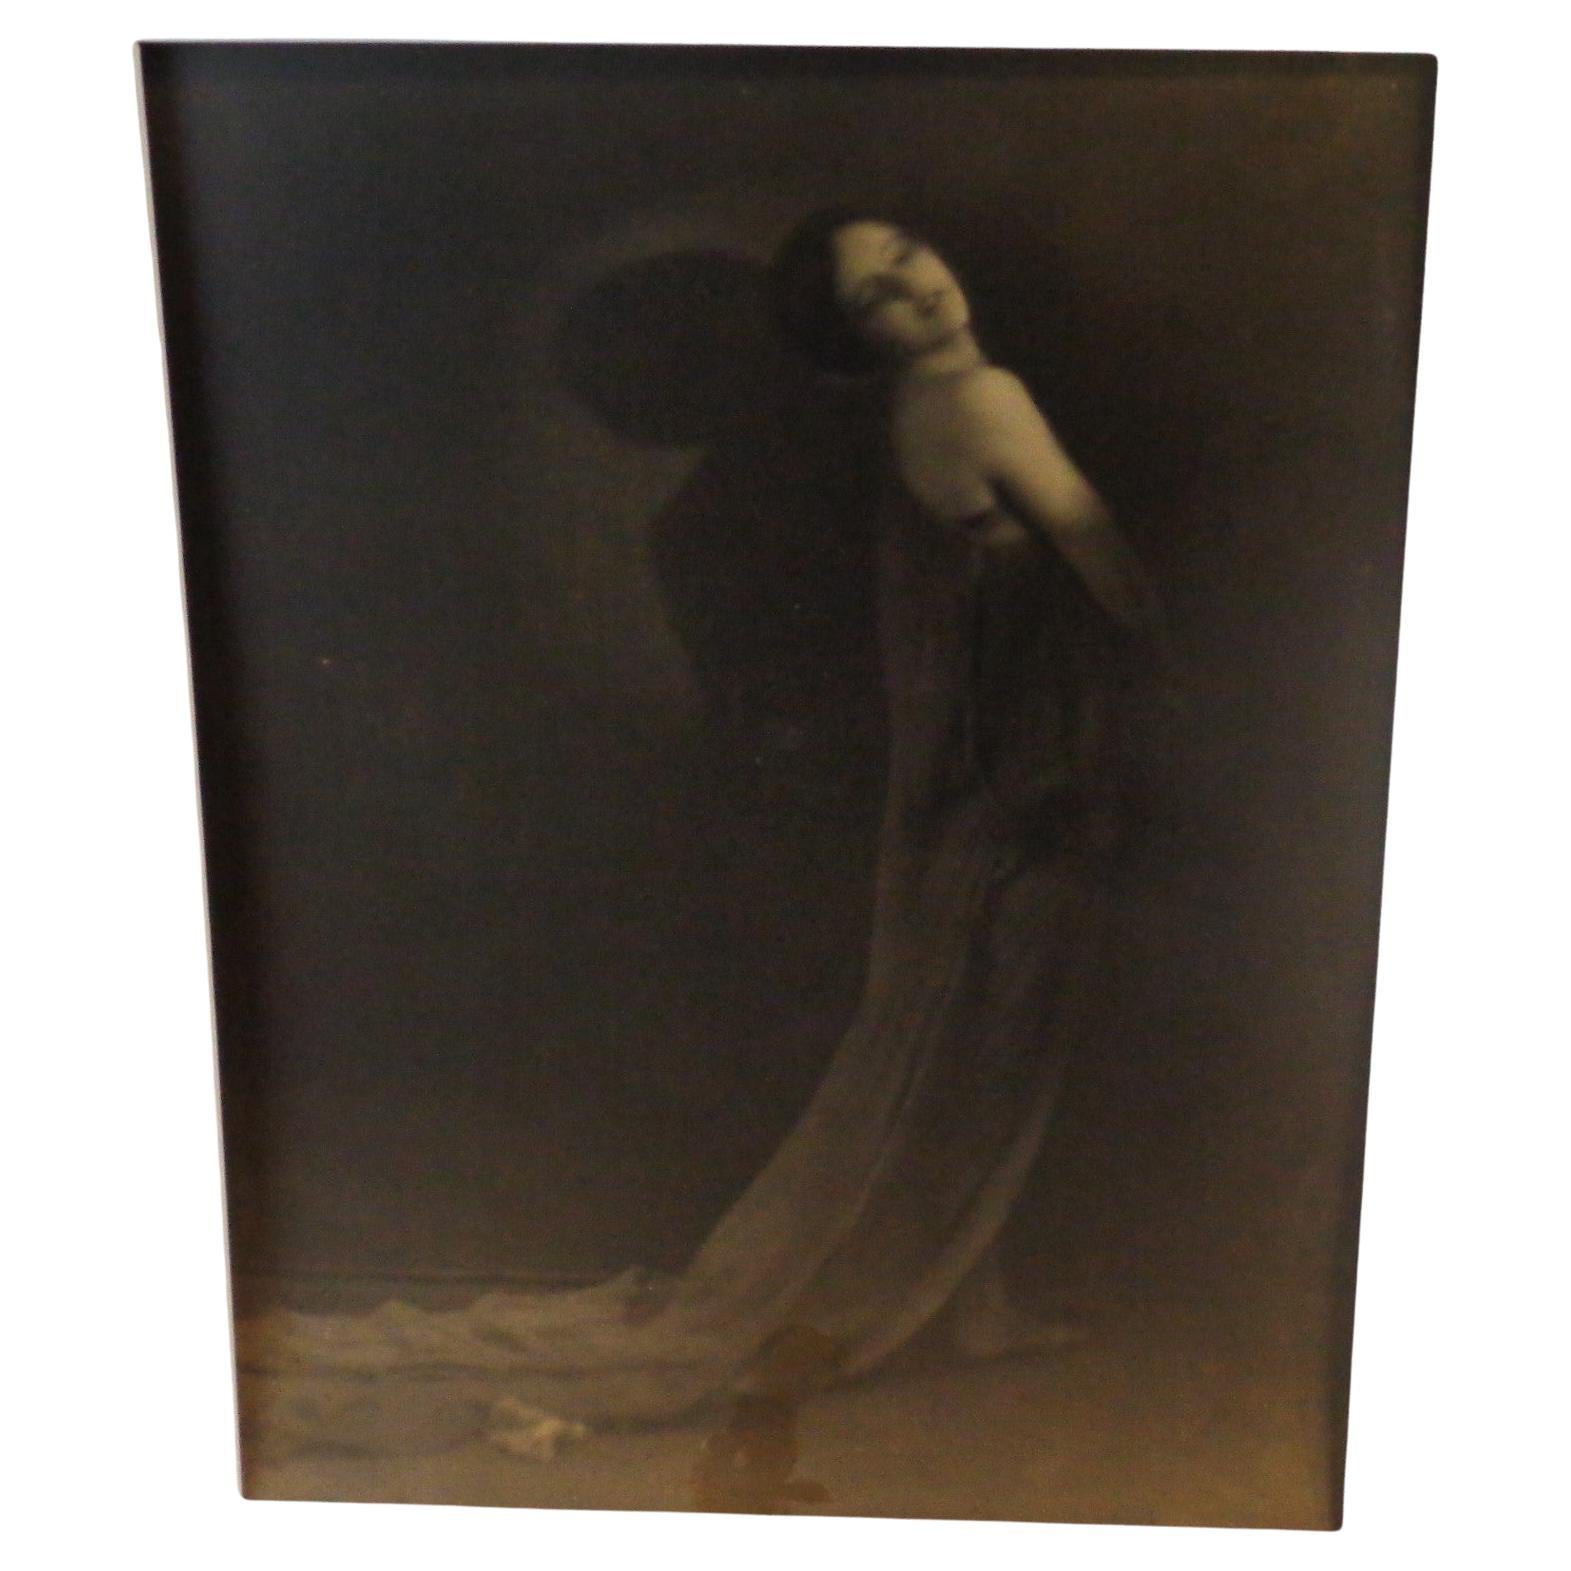 Early original pictorialist sepia tone gelatin silver print photograph of a sultry young woman in a flowing gown by Rochester NY photographer Ned Hungerford, 1900-1910. Beautiful ethereal imagery. Mat size 20